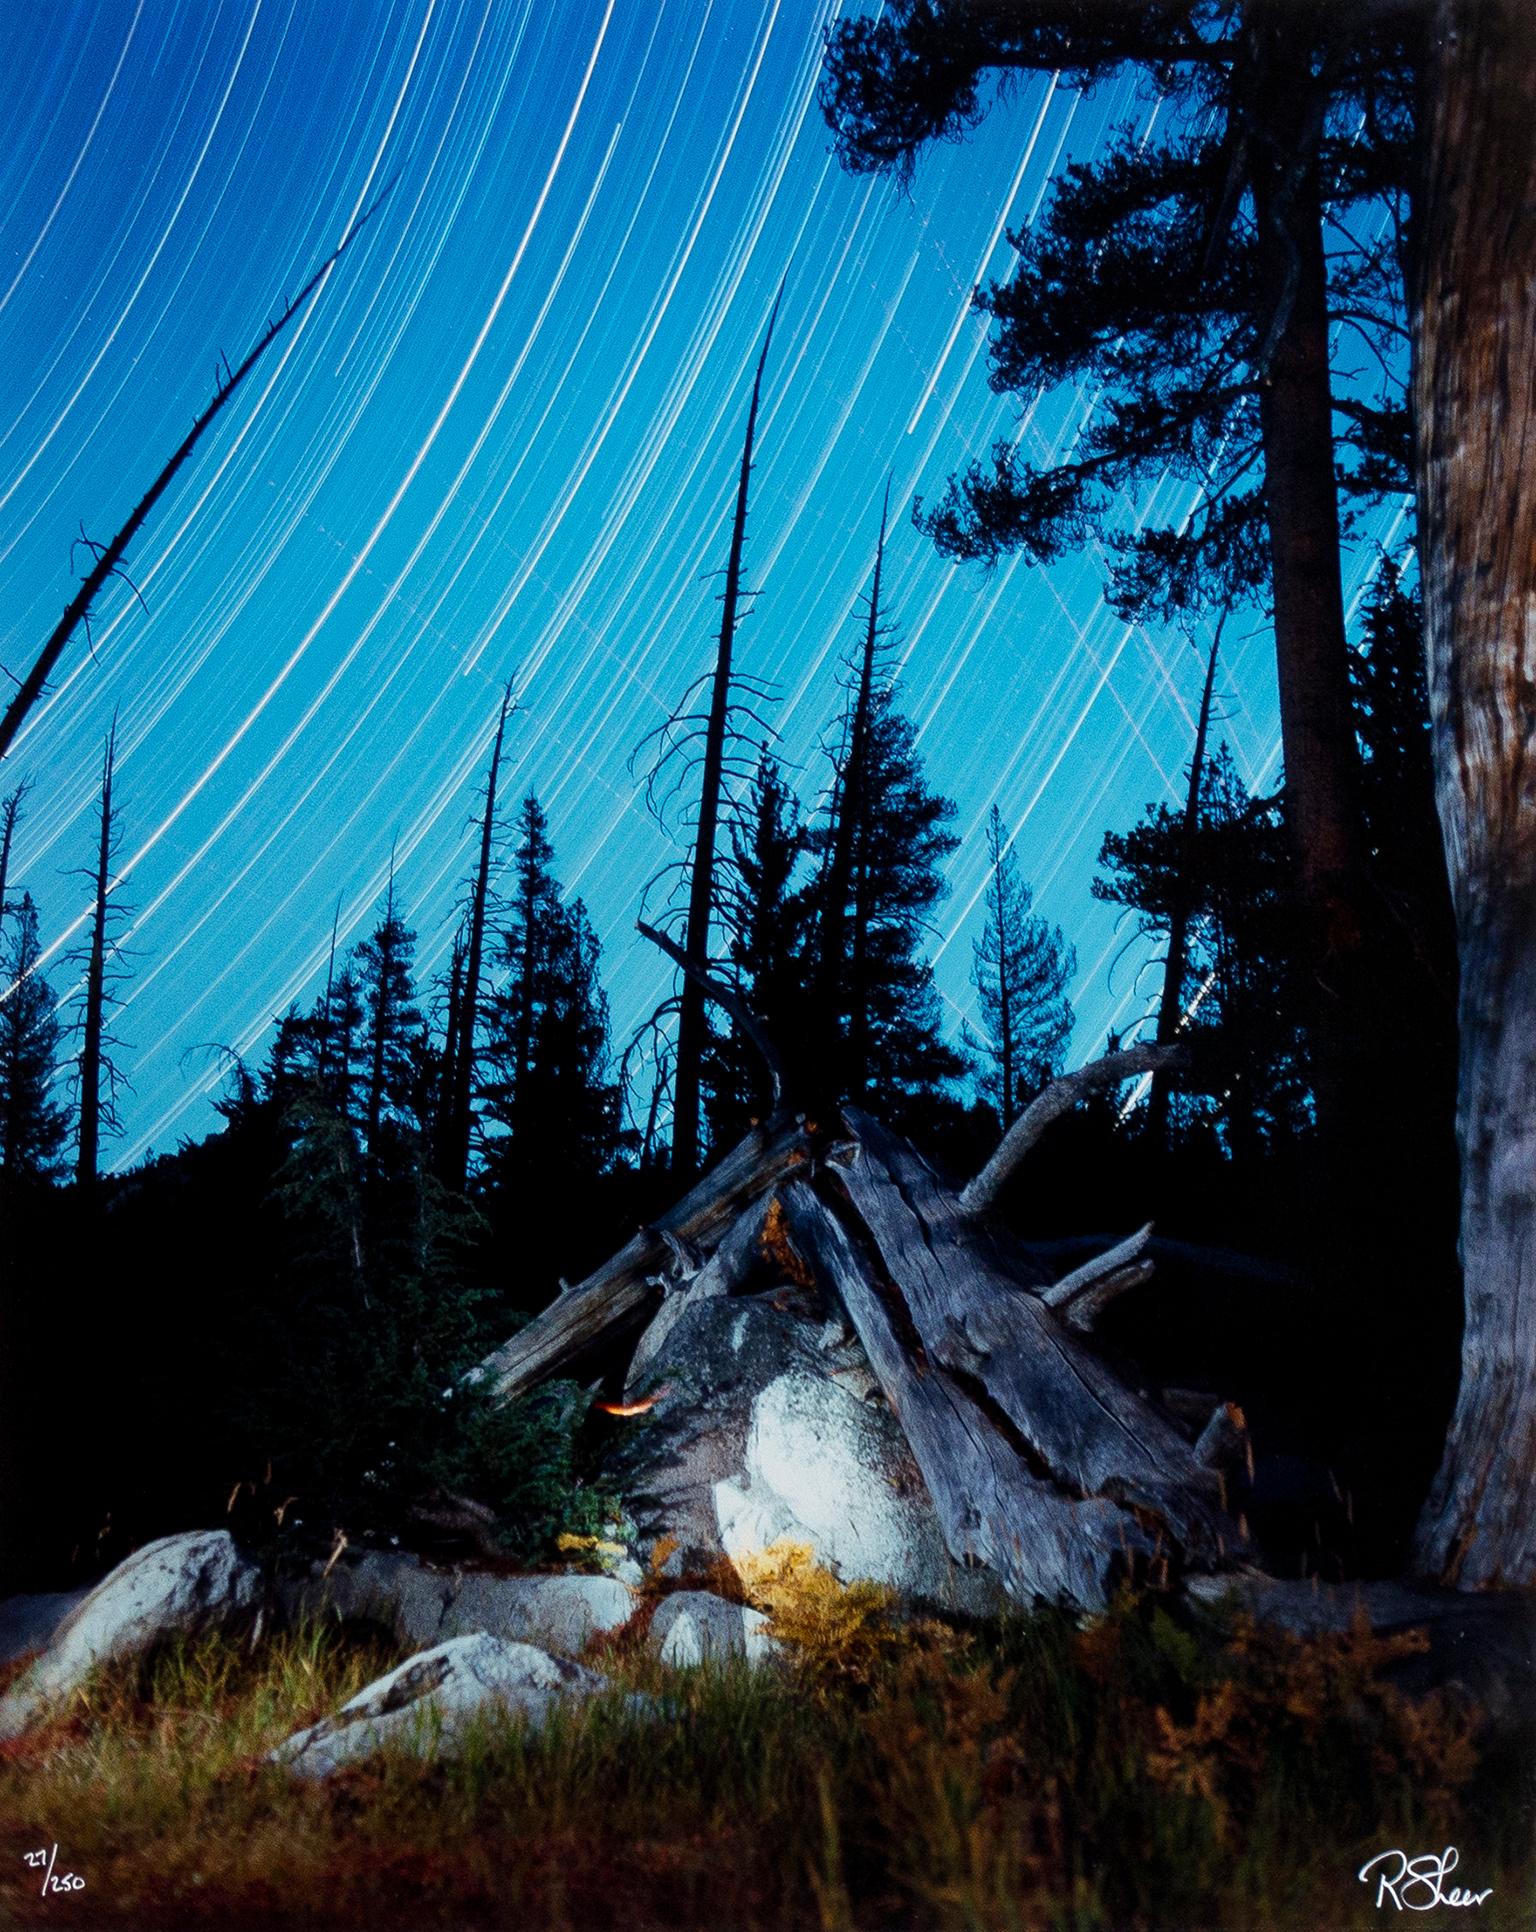 "The Spirit of John Muir with Start Trails, Yosemite, " Photograph by R.K. Sheer